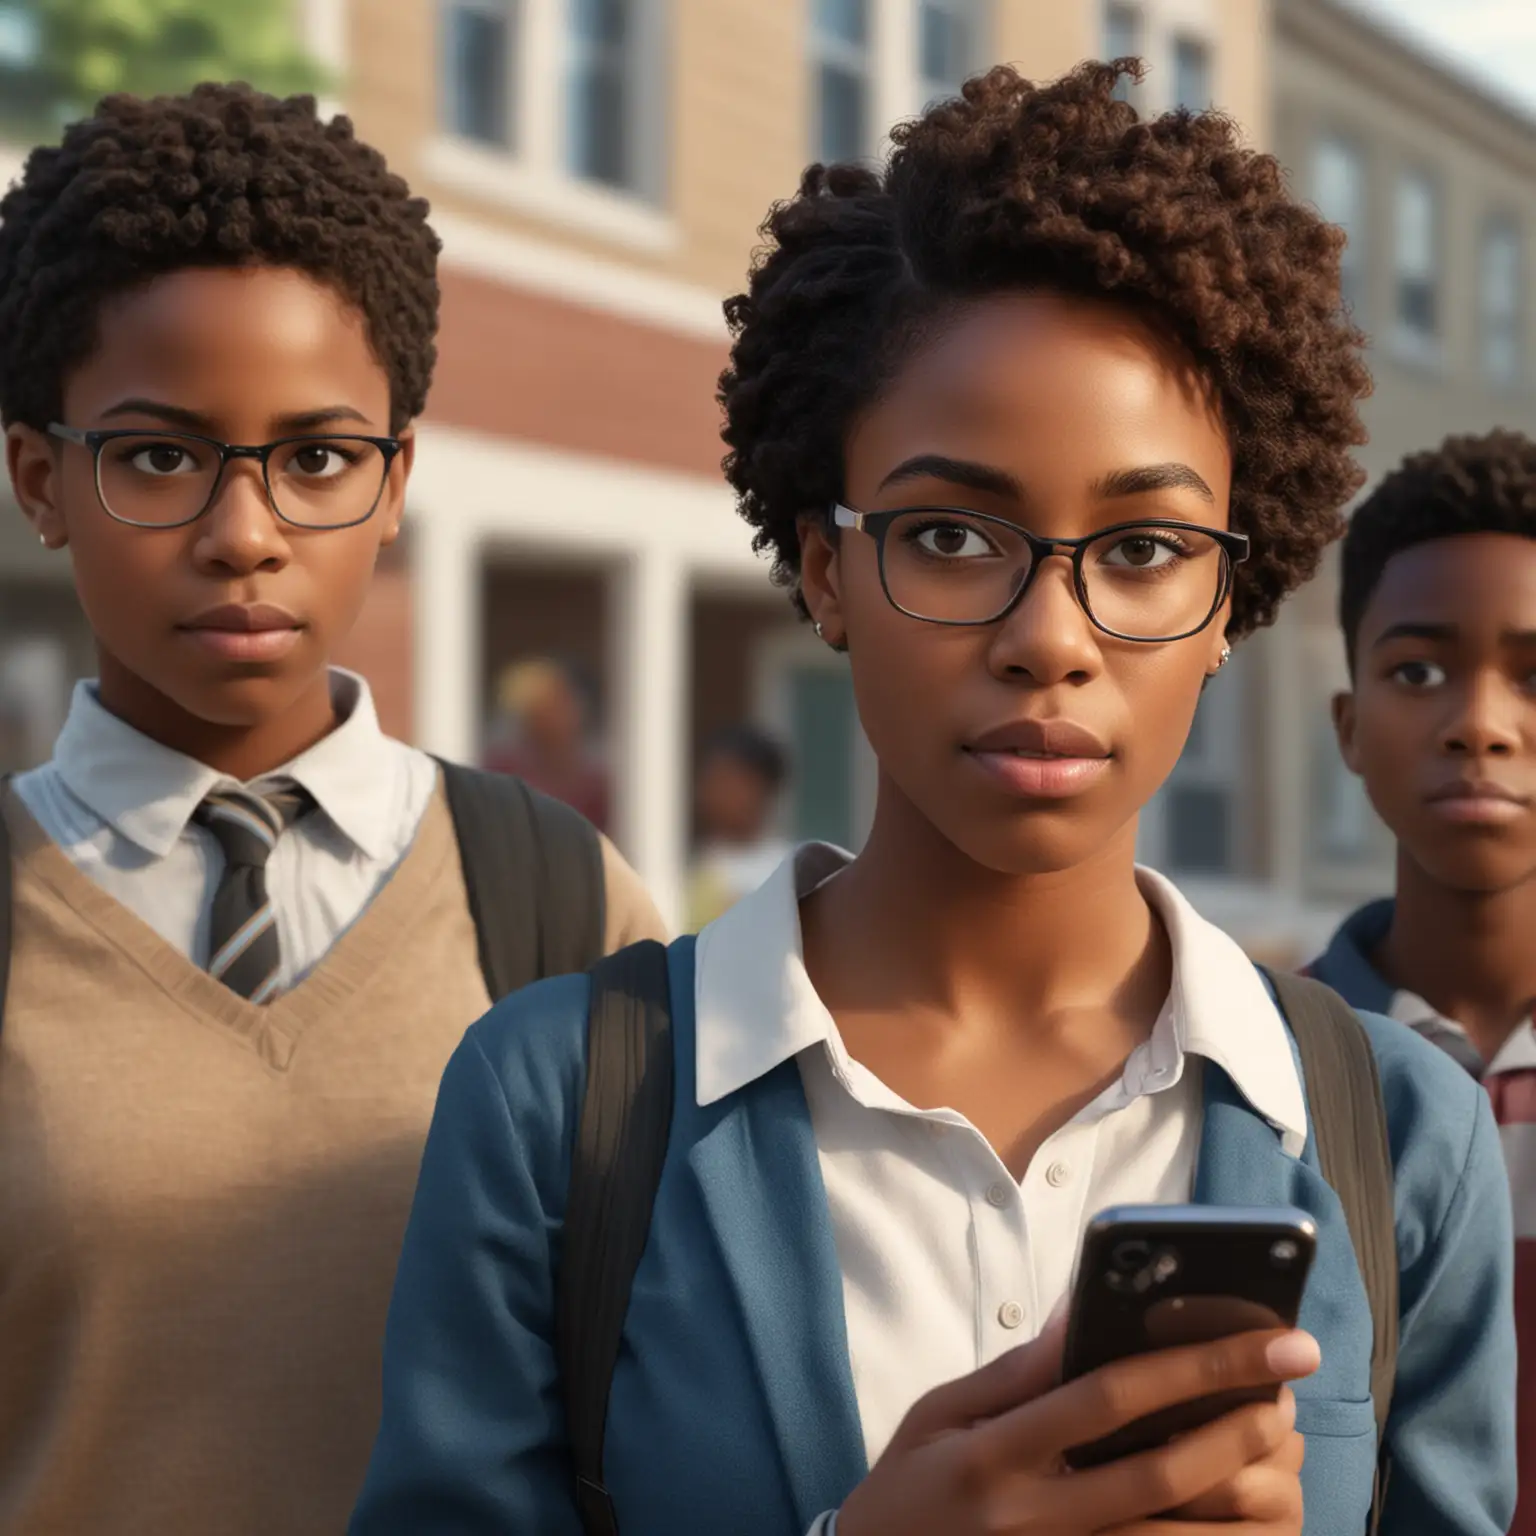 Generate a realistic image of a young black female teacher looking on from a distance as  two black middle school boys pass by looking at their phone.
